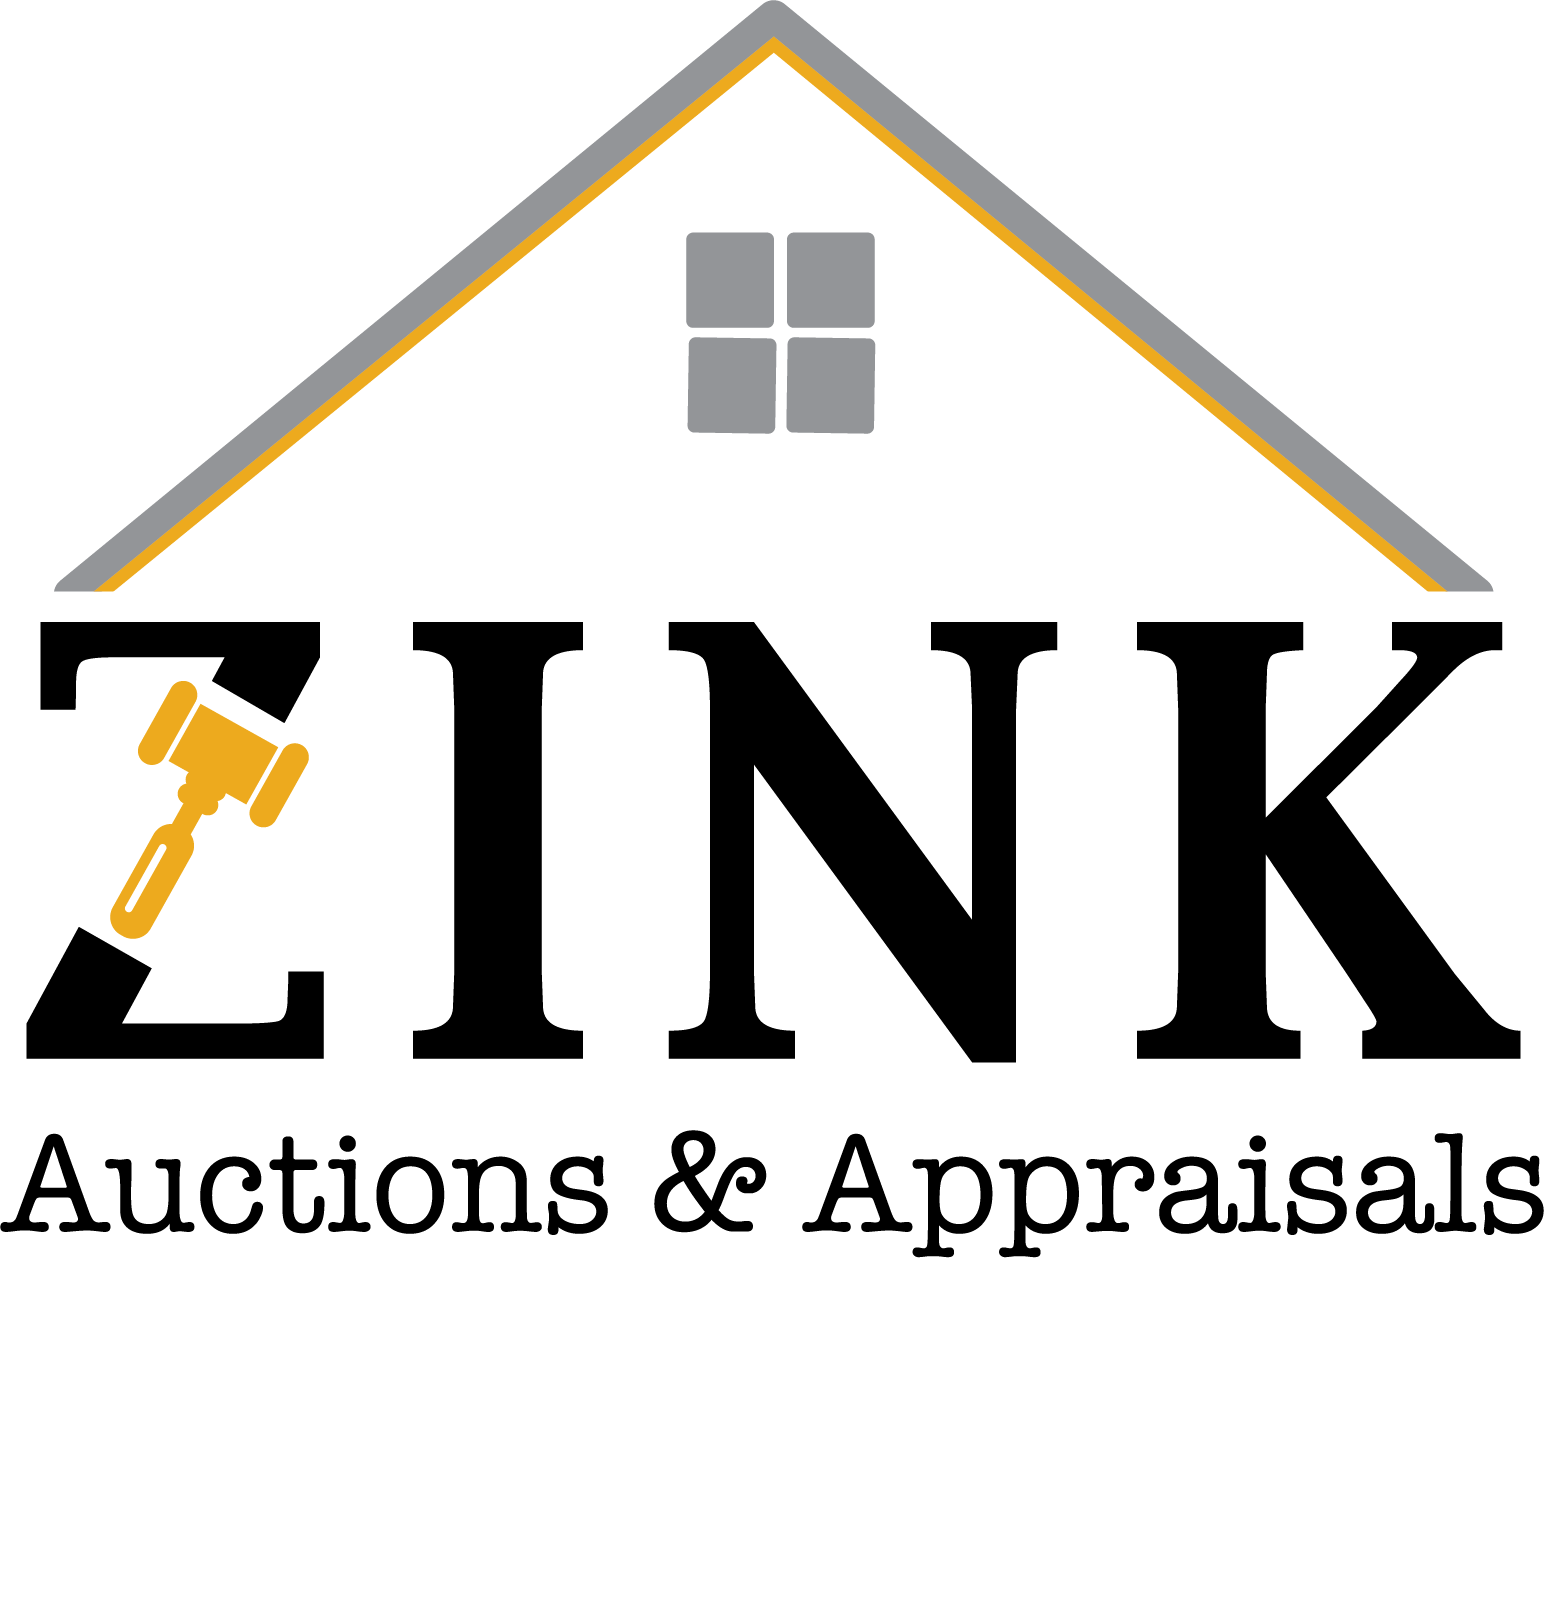 Naa Logo - What is the National Auctioneers Association (NAA)? Auctions